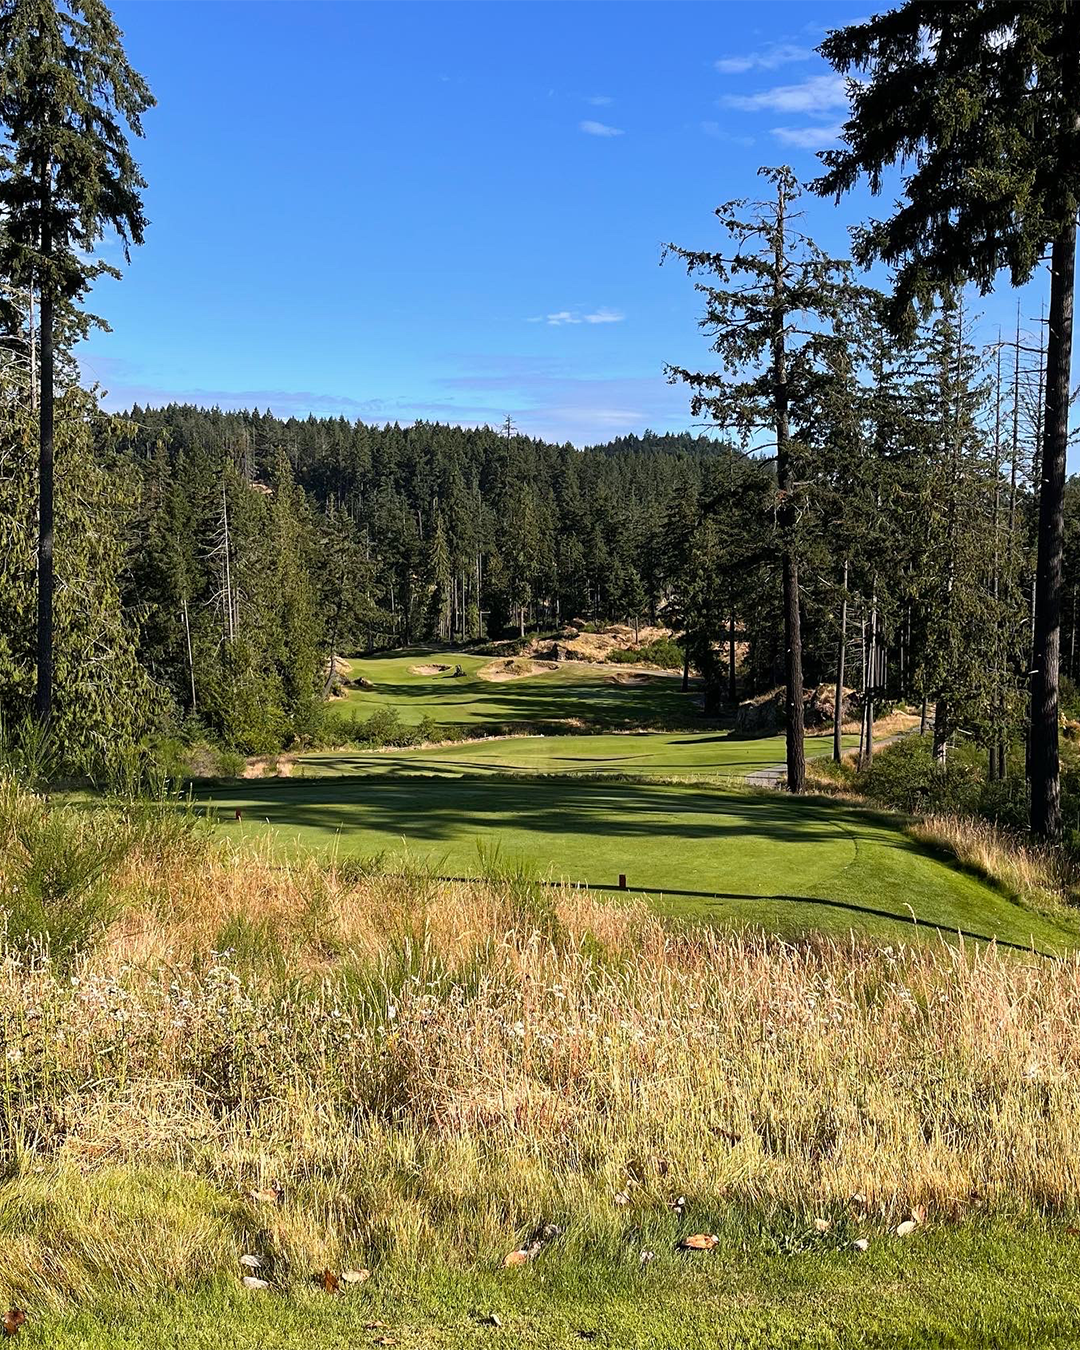 West Coast is the Best Coast: Golf Travel to Canada